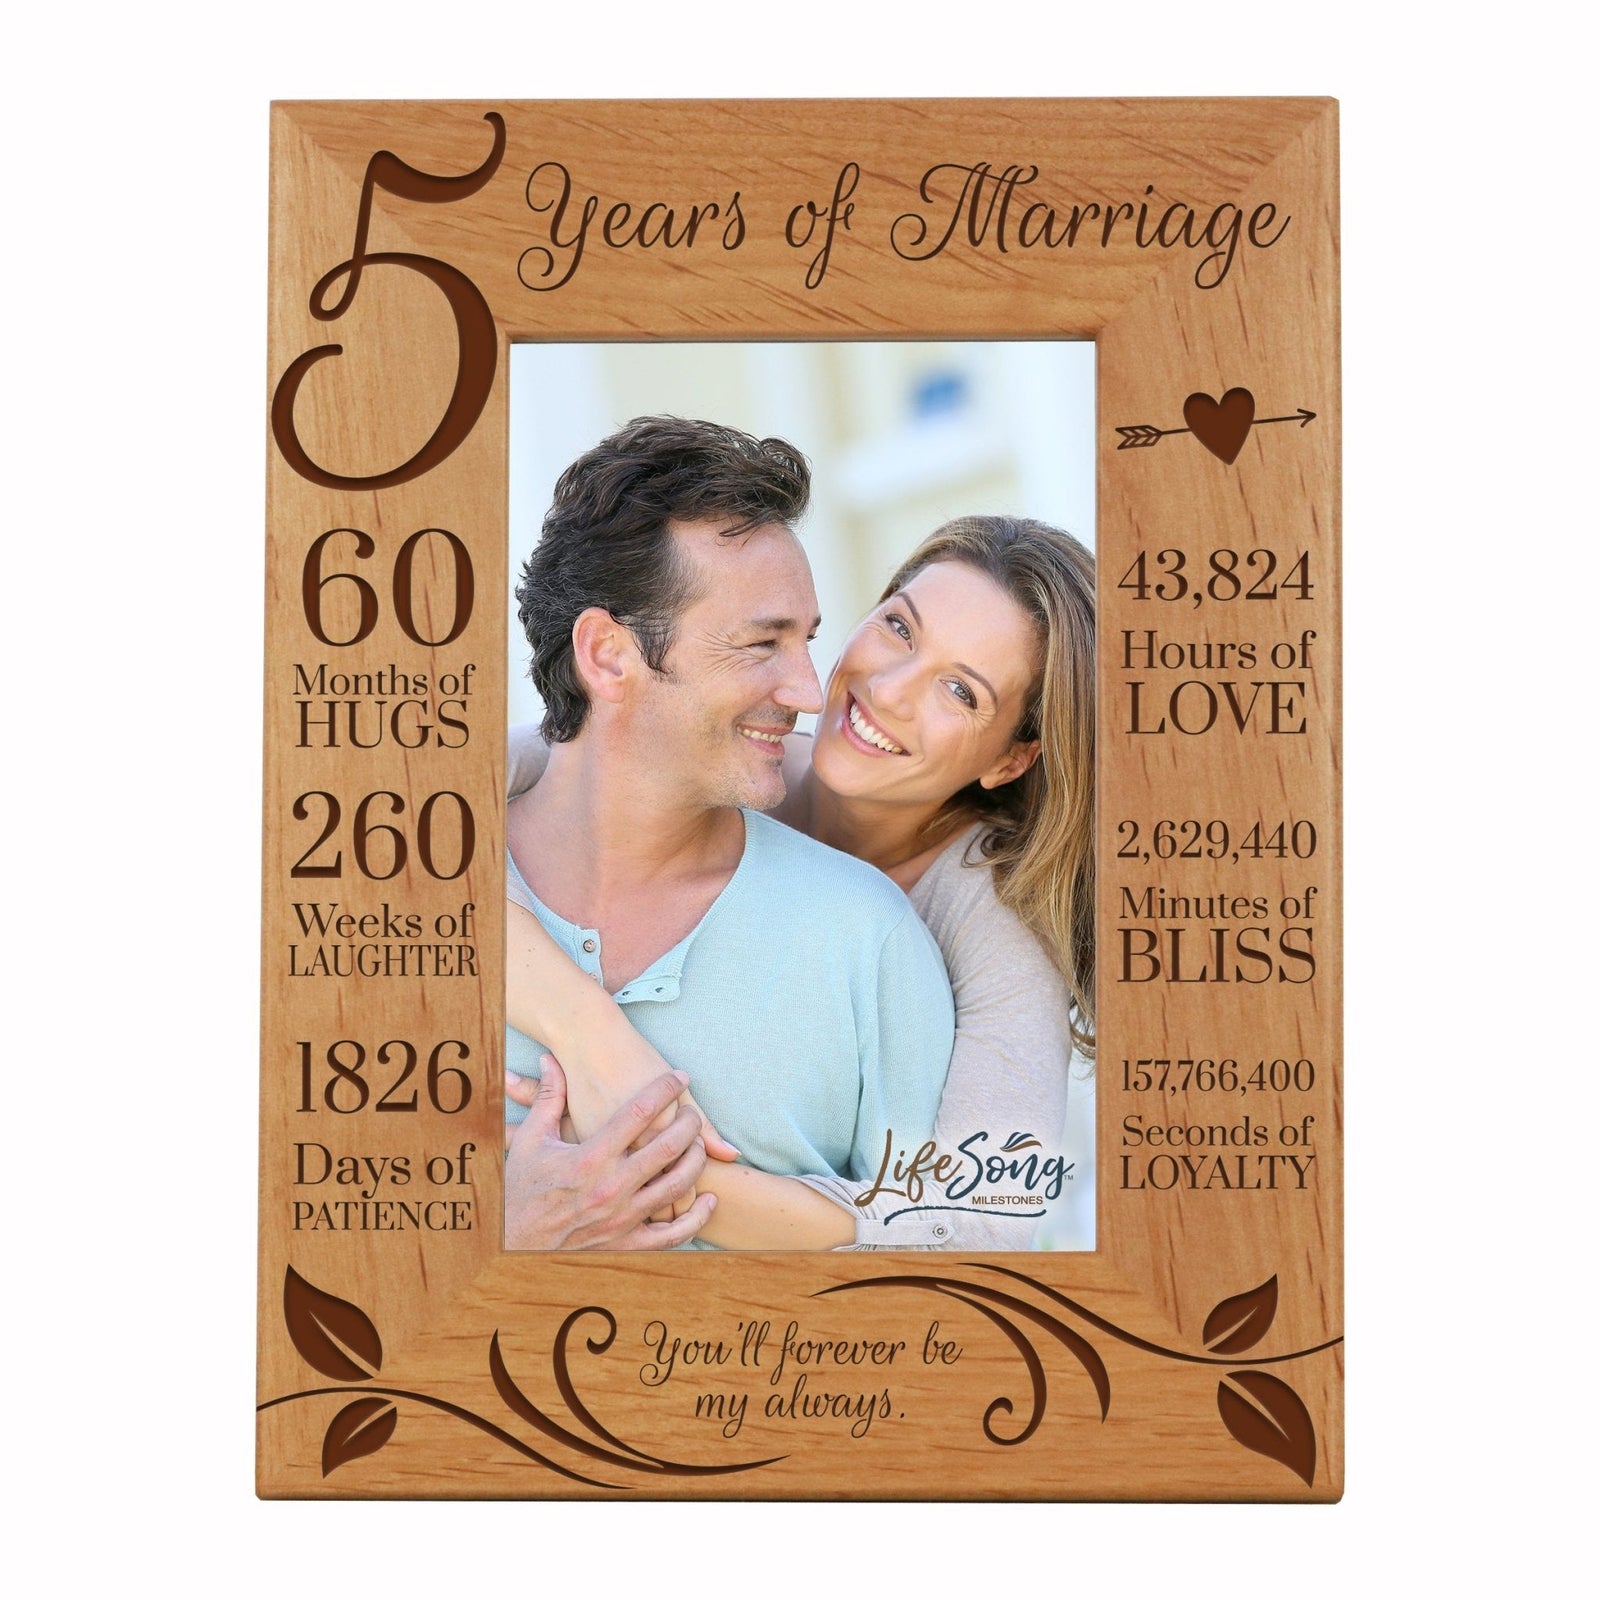 Engraved 5th Wedding Anniversary Photo Frame Wall Decor Gift for Couples - Forever Be My Always - LifeSong Milestones